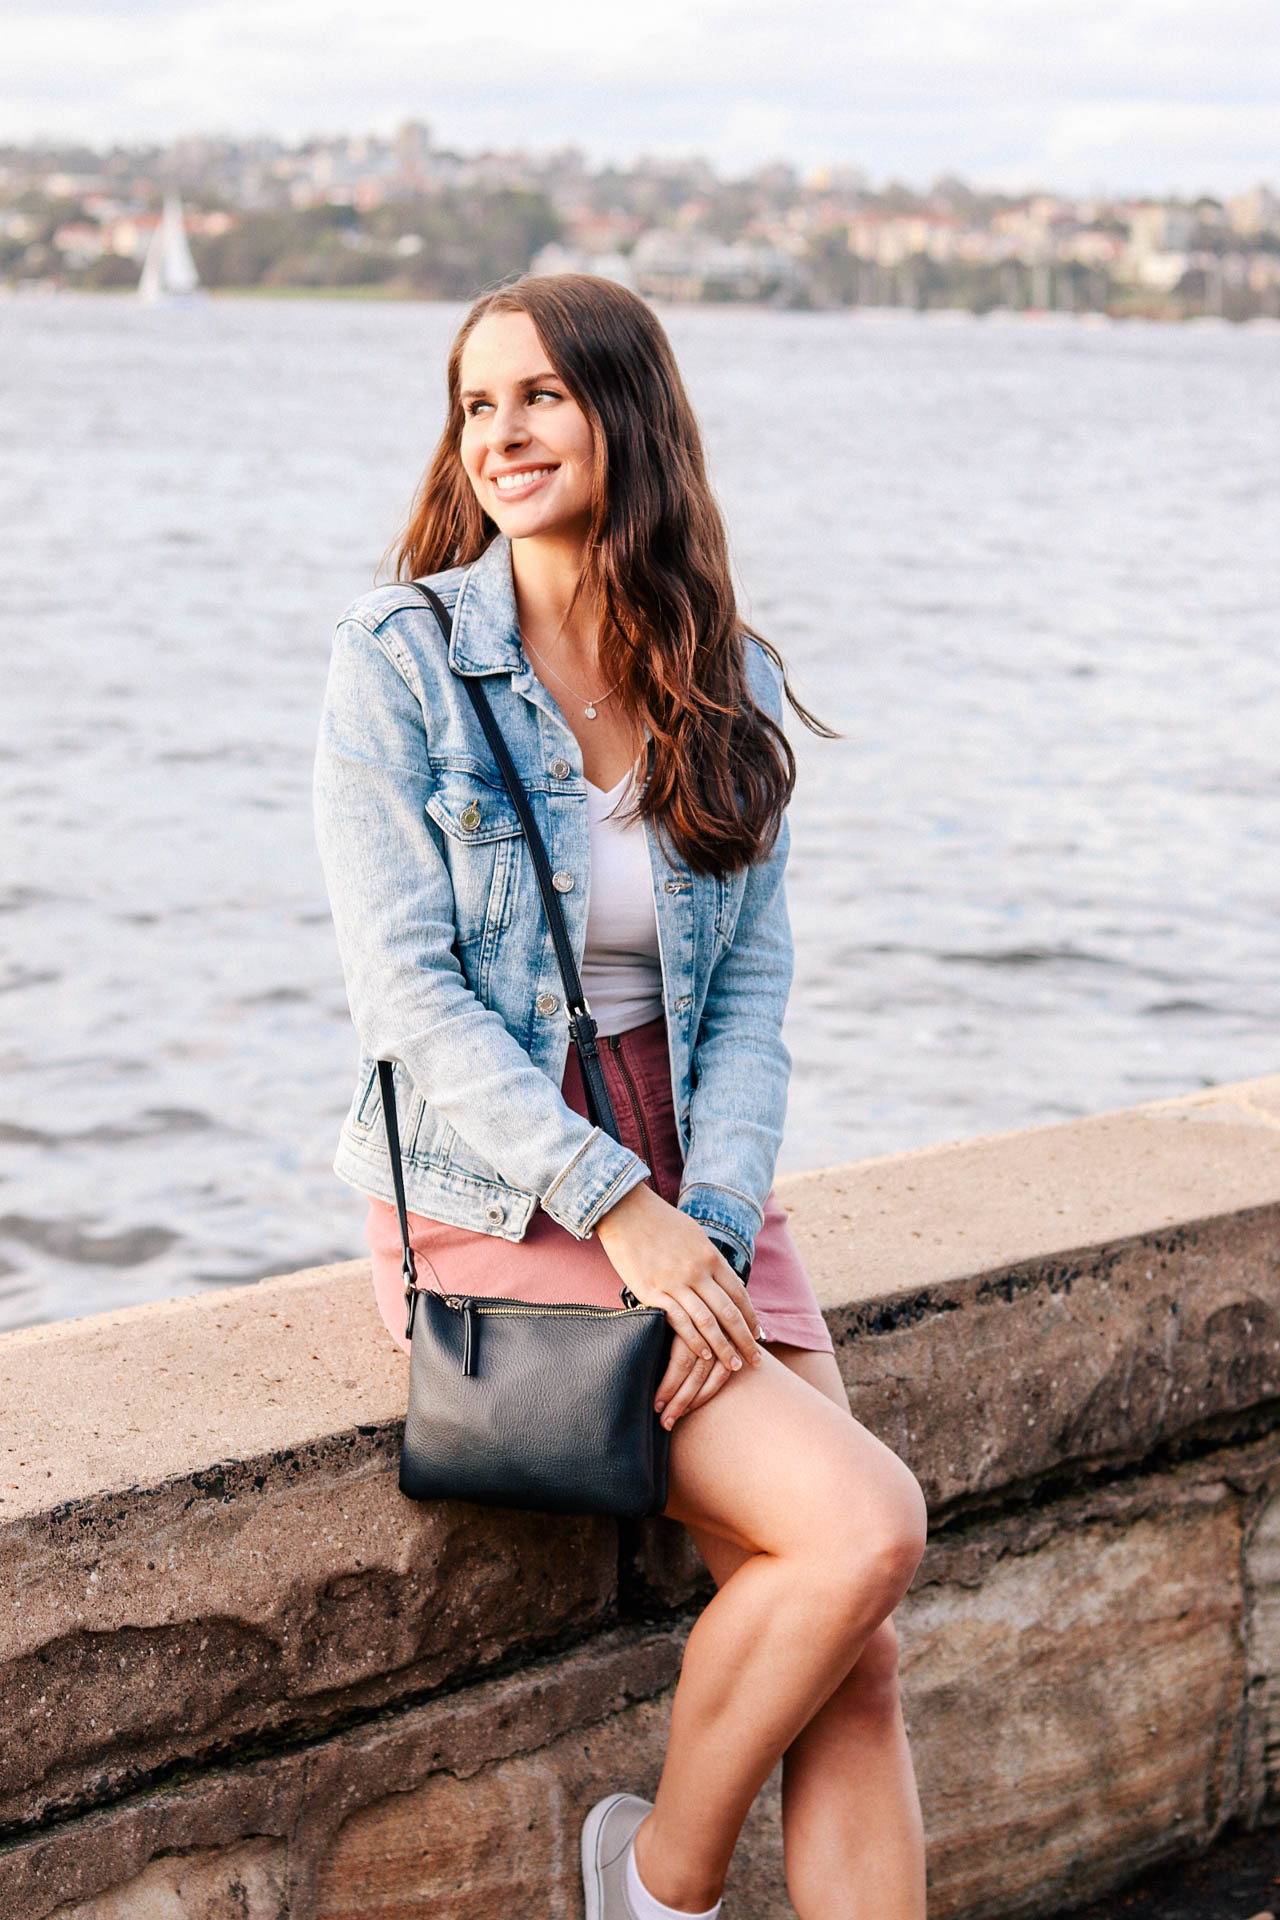 Keeping it casual in a look from @nordstrom. Sharing this look and